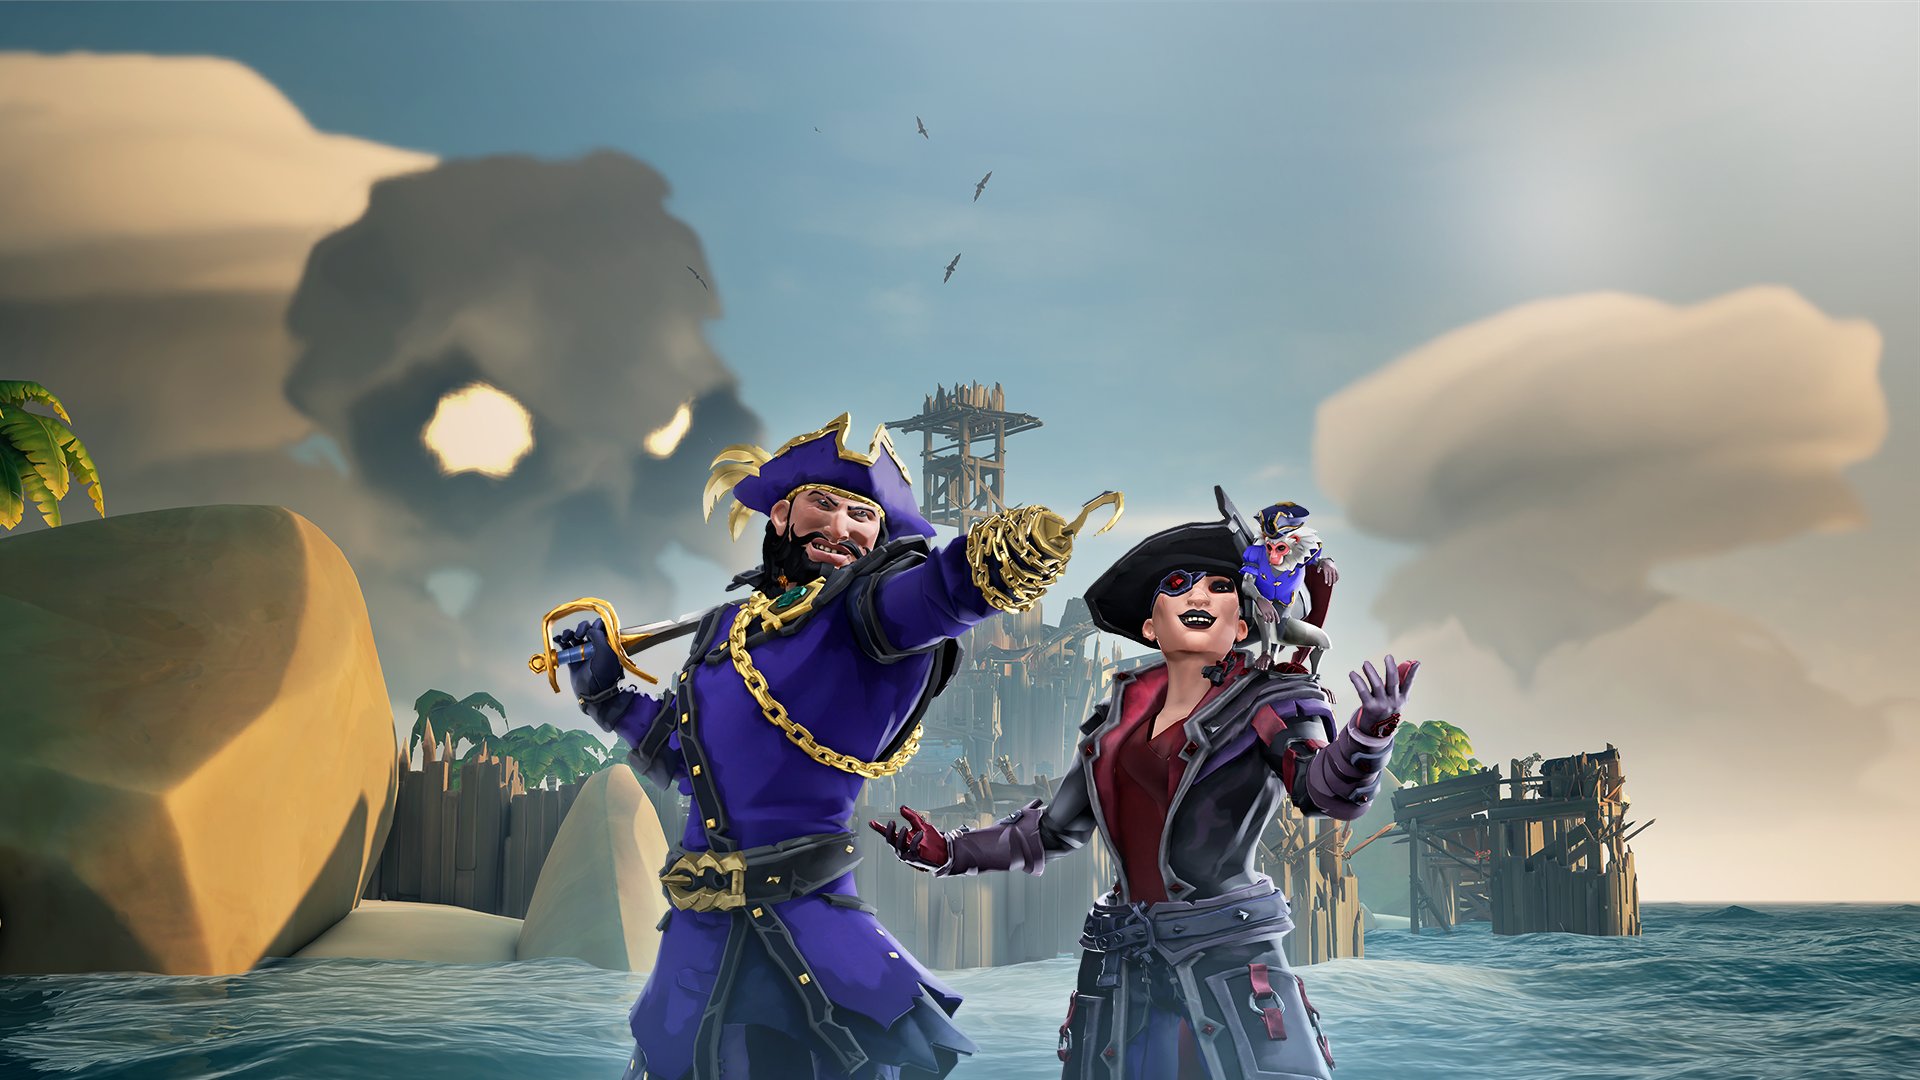 Sea of Thieves on X: The Pirate Legends on our official Discord server  have voted, and Ashen Winds will be a more frequent occurrence throughout  Legends Week, running from September 7th-14th! Dependent